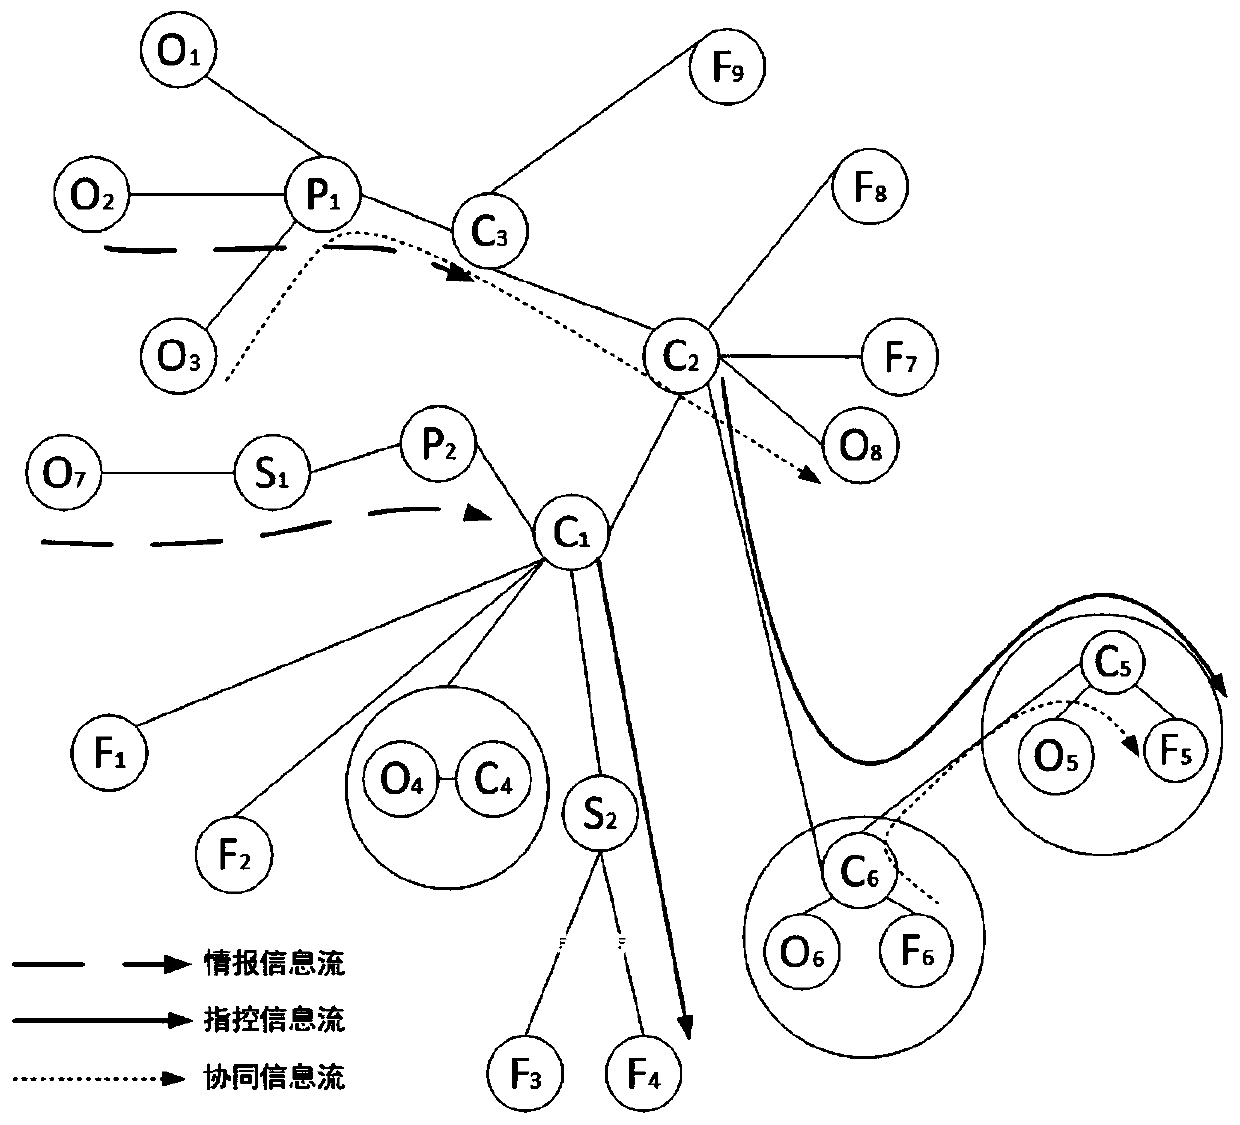 Joint combat system modeling method based on hyper-network theory and storage medium